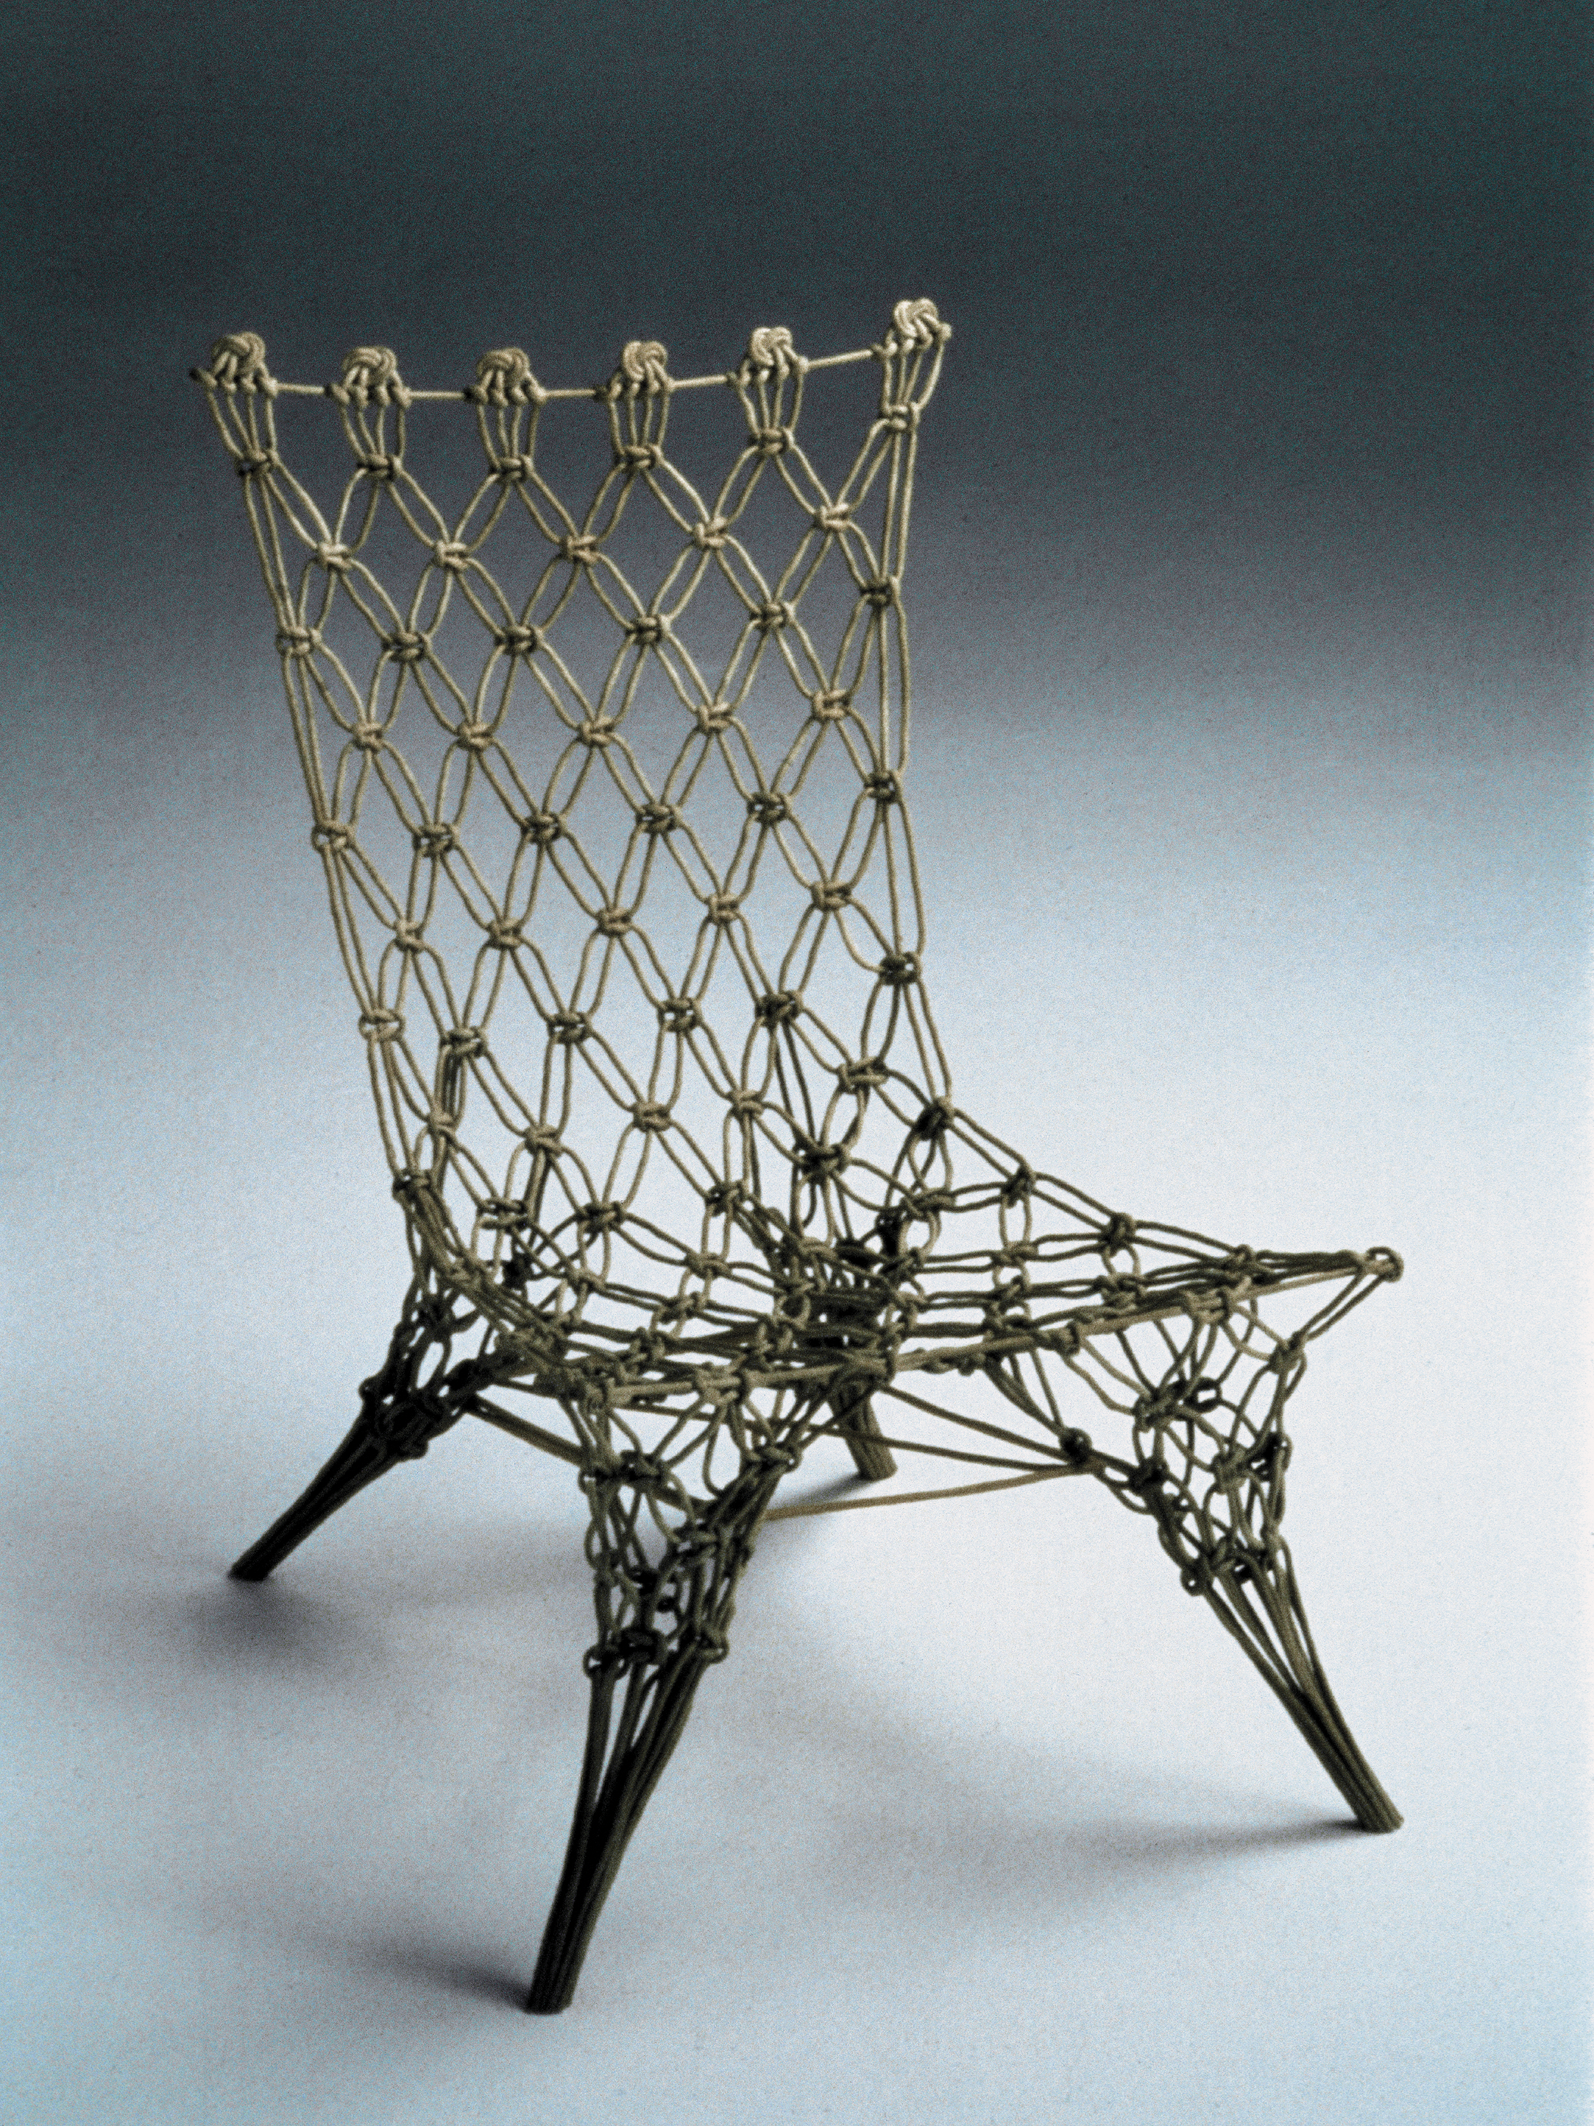 Knotted chair by Marcel Wanders – droog